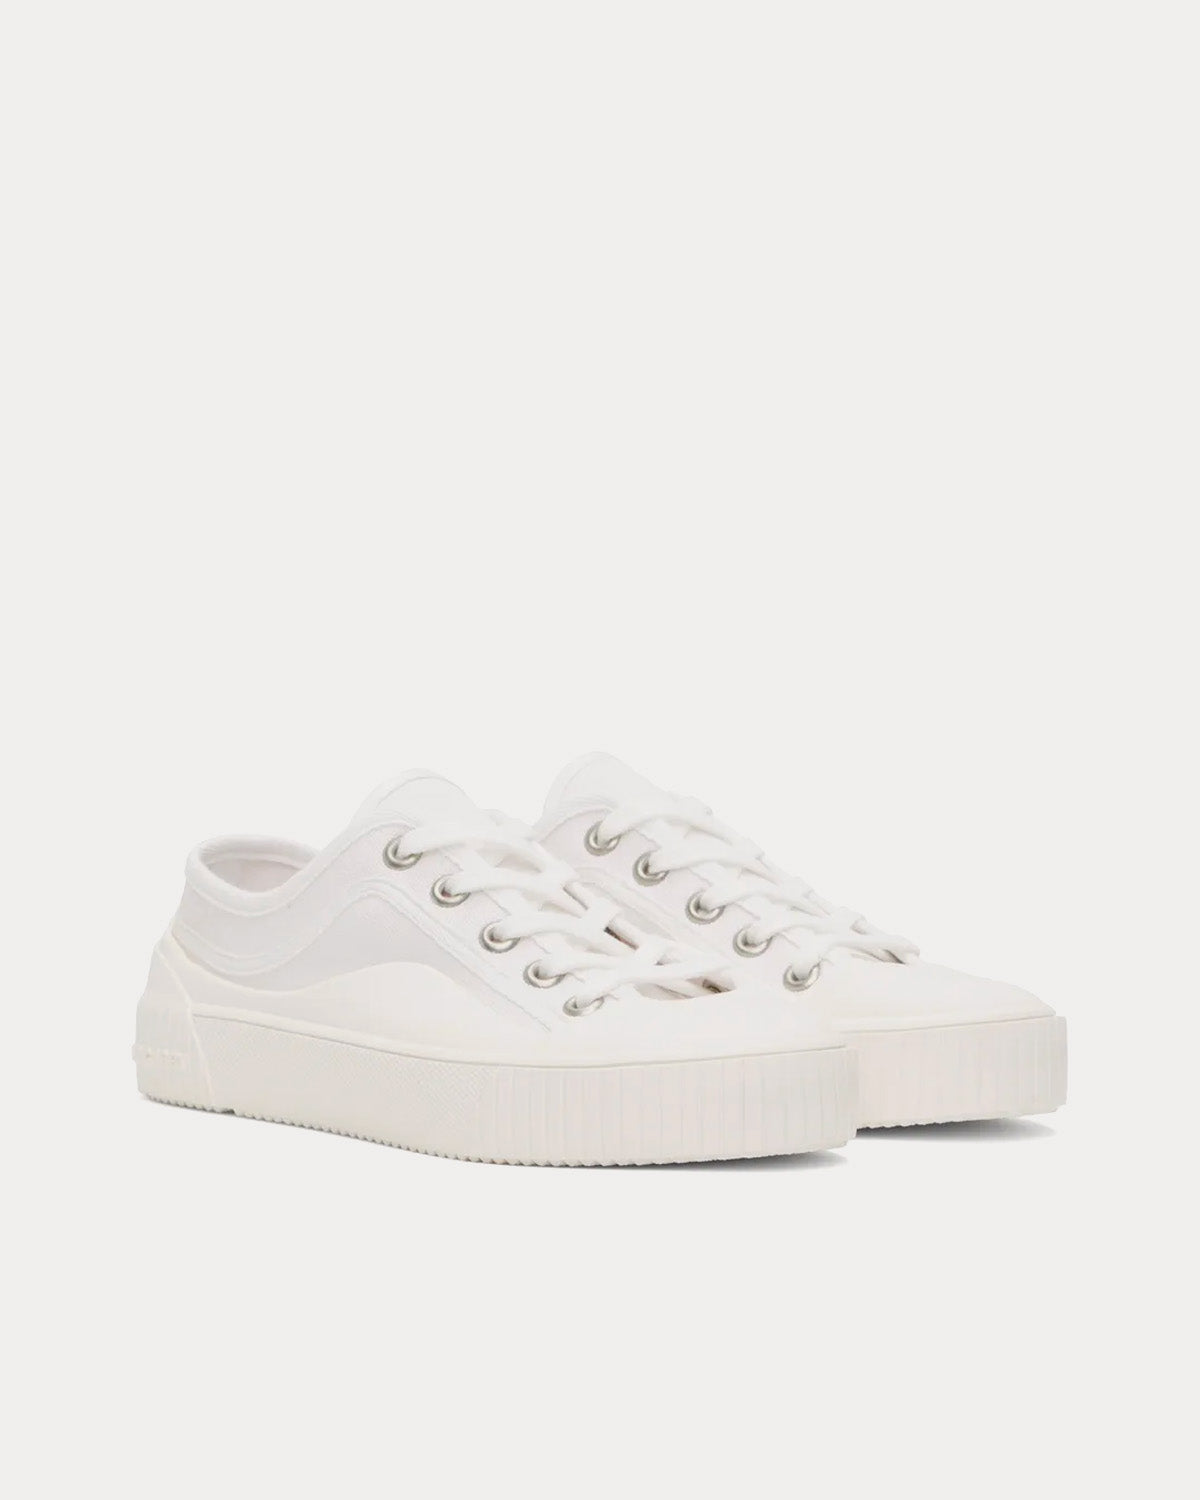 A.P.C. - Iggy Basse White Low Top Sneakers